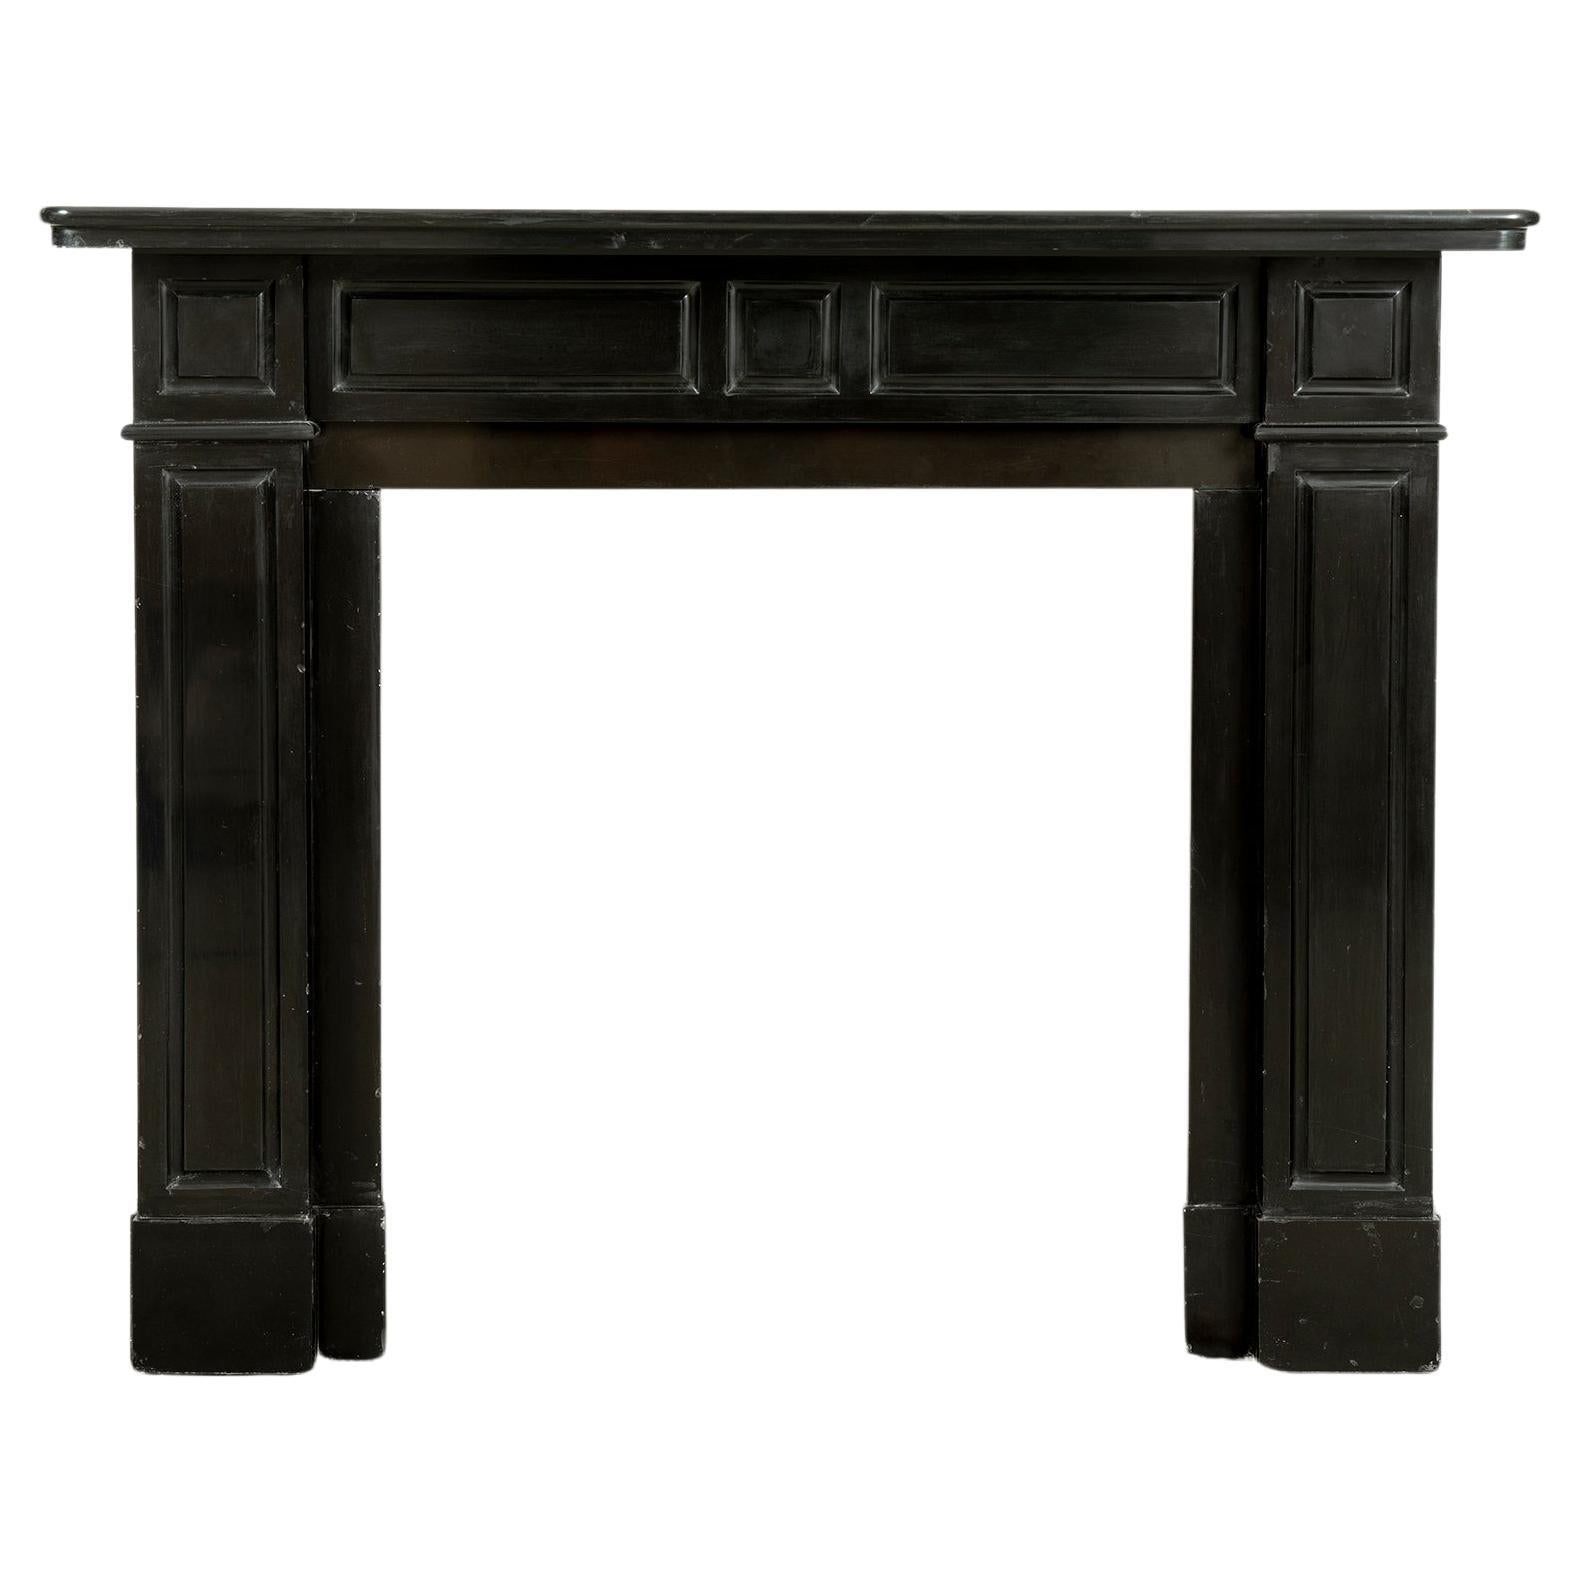 Antique Fireplace in Black Marble